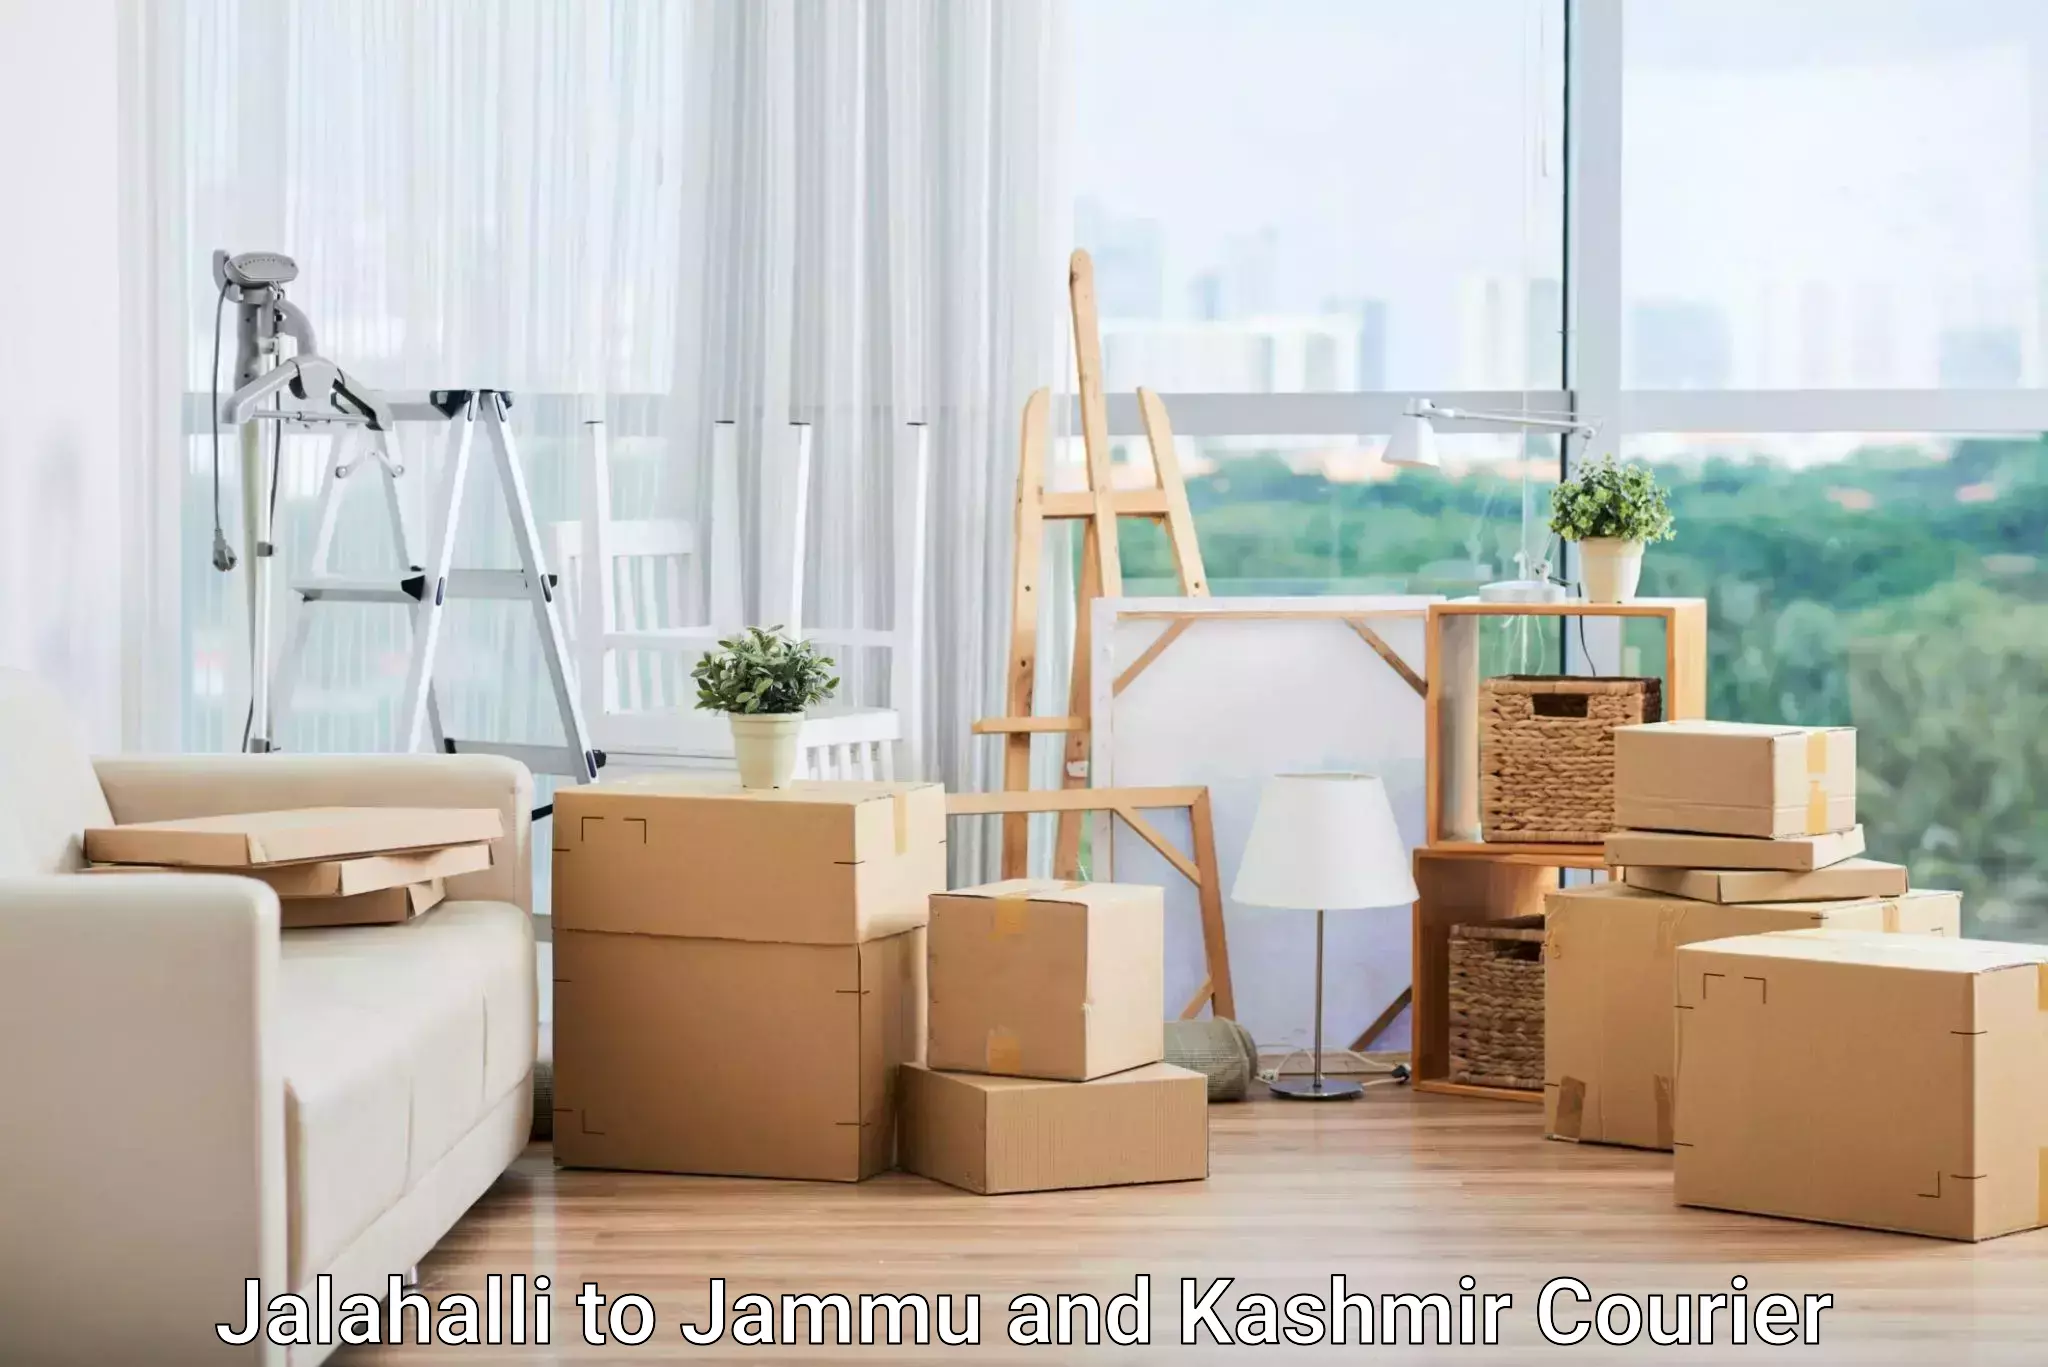 Reliable parcel services Jalahalli to Baramulla